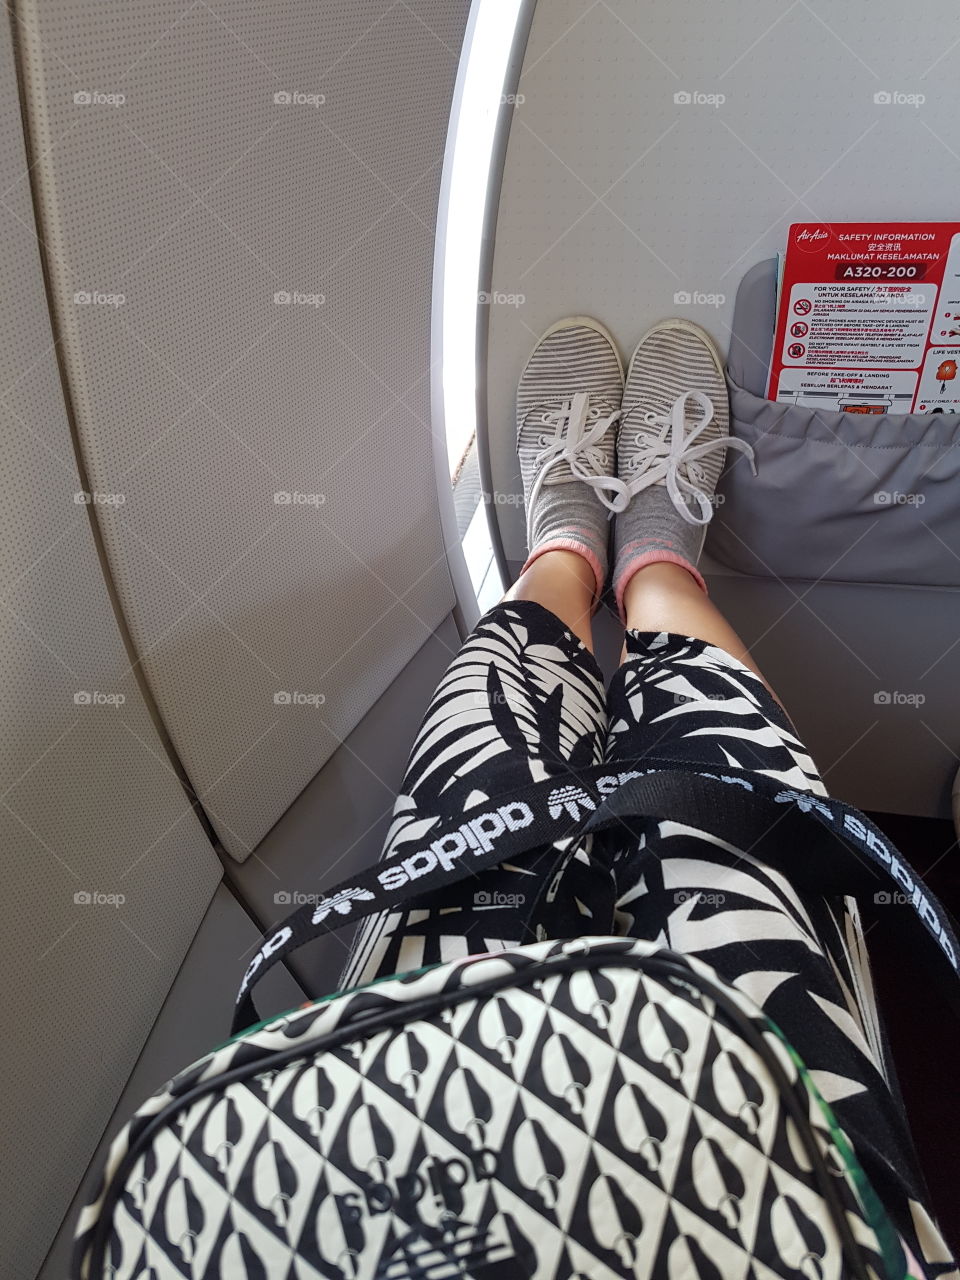 Travelling with Adidas by Airasia